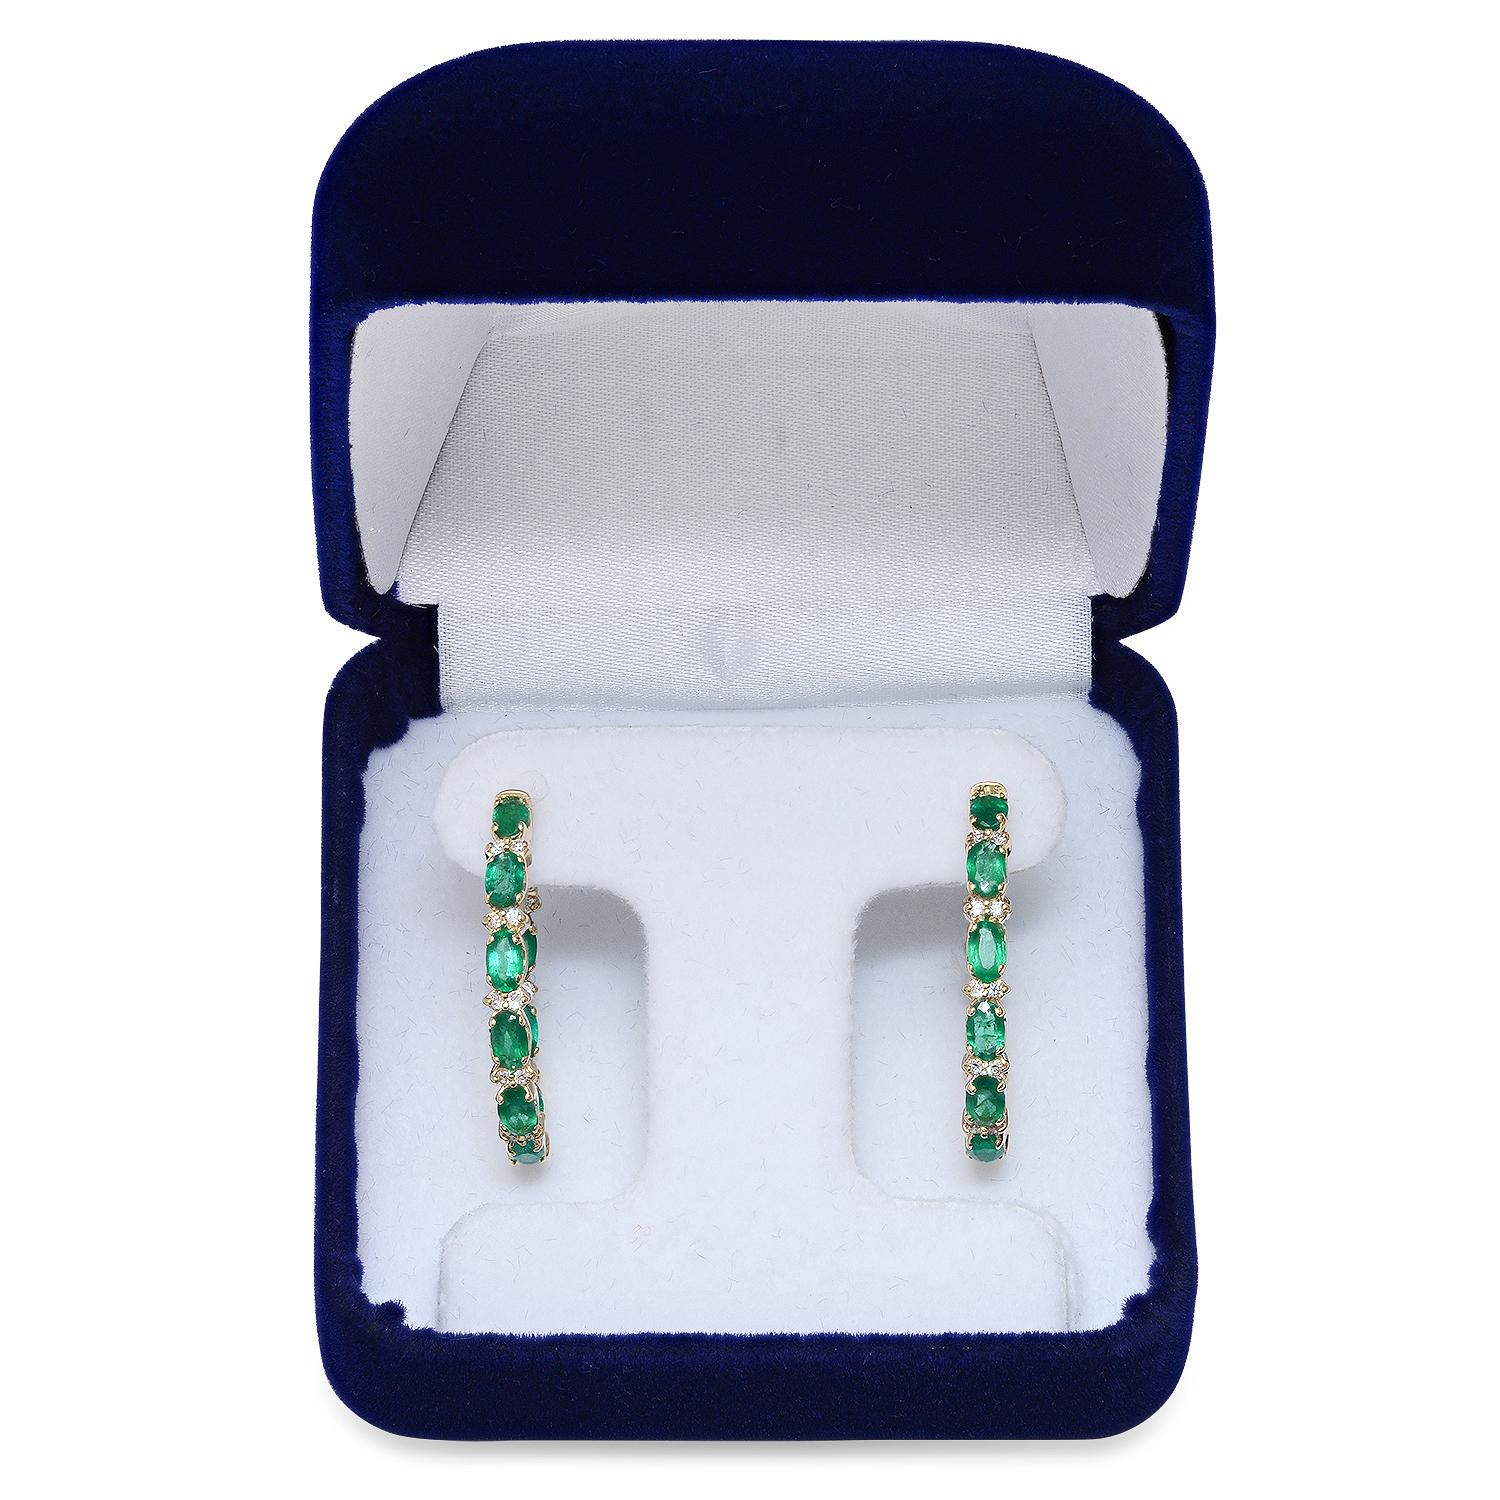 14K Yellow Gold with 3.42ct Emerald and 0.37ct Diamond Earrings